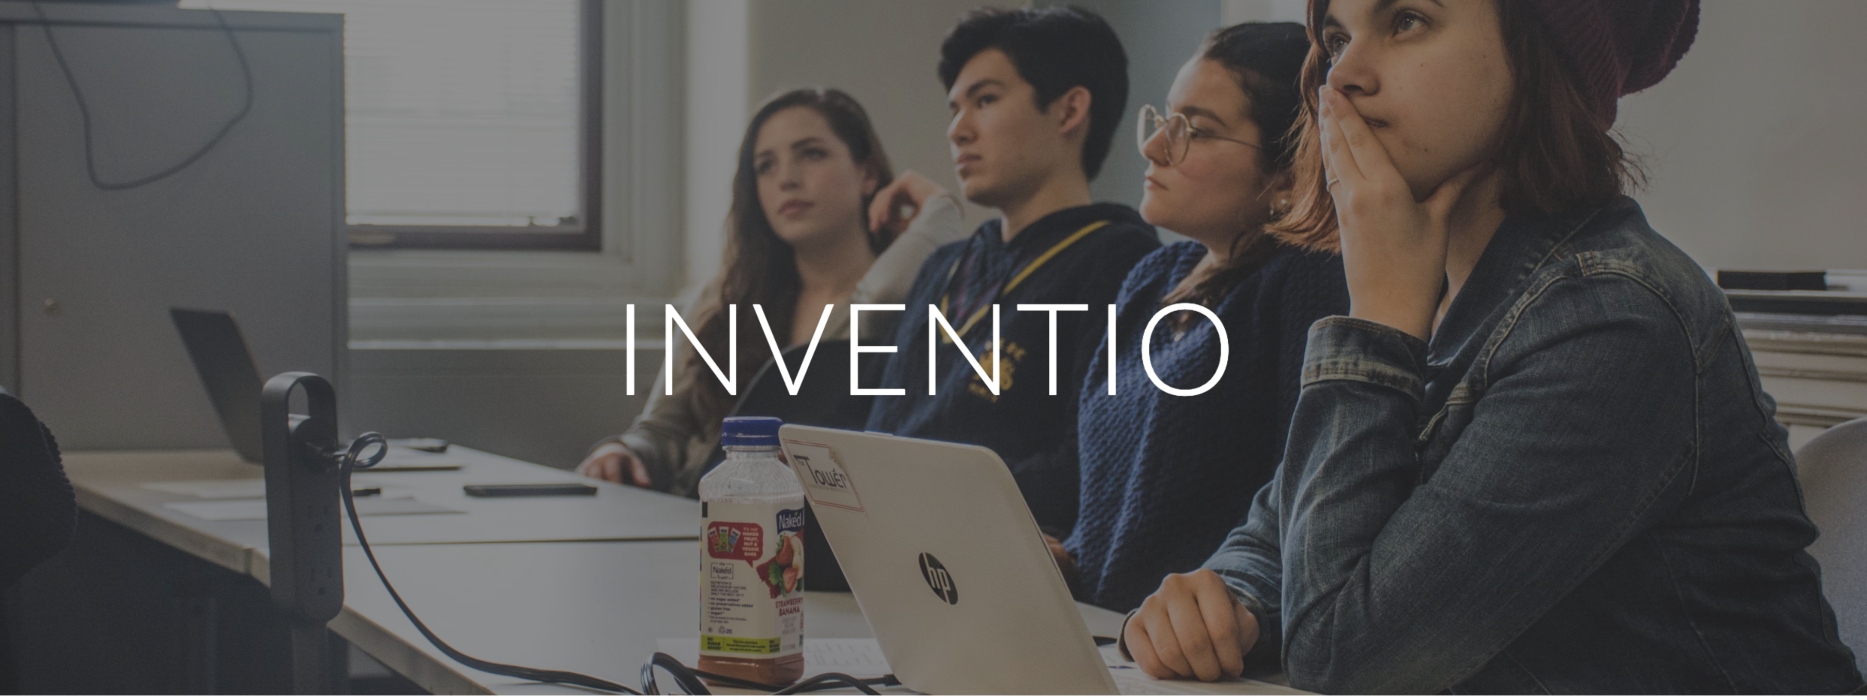 Student editorial board meeting for Inventio